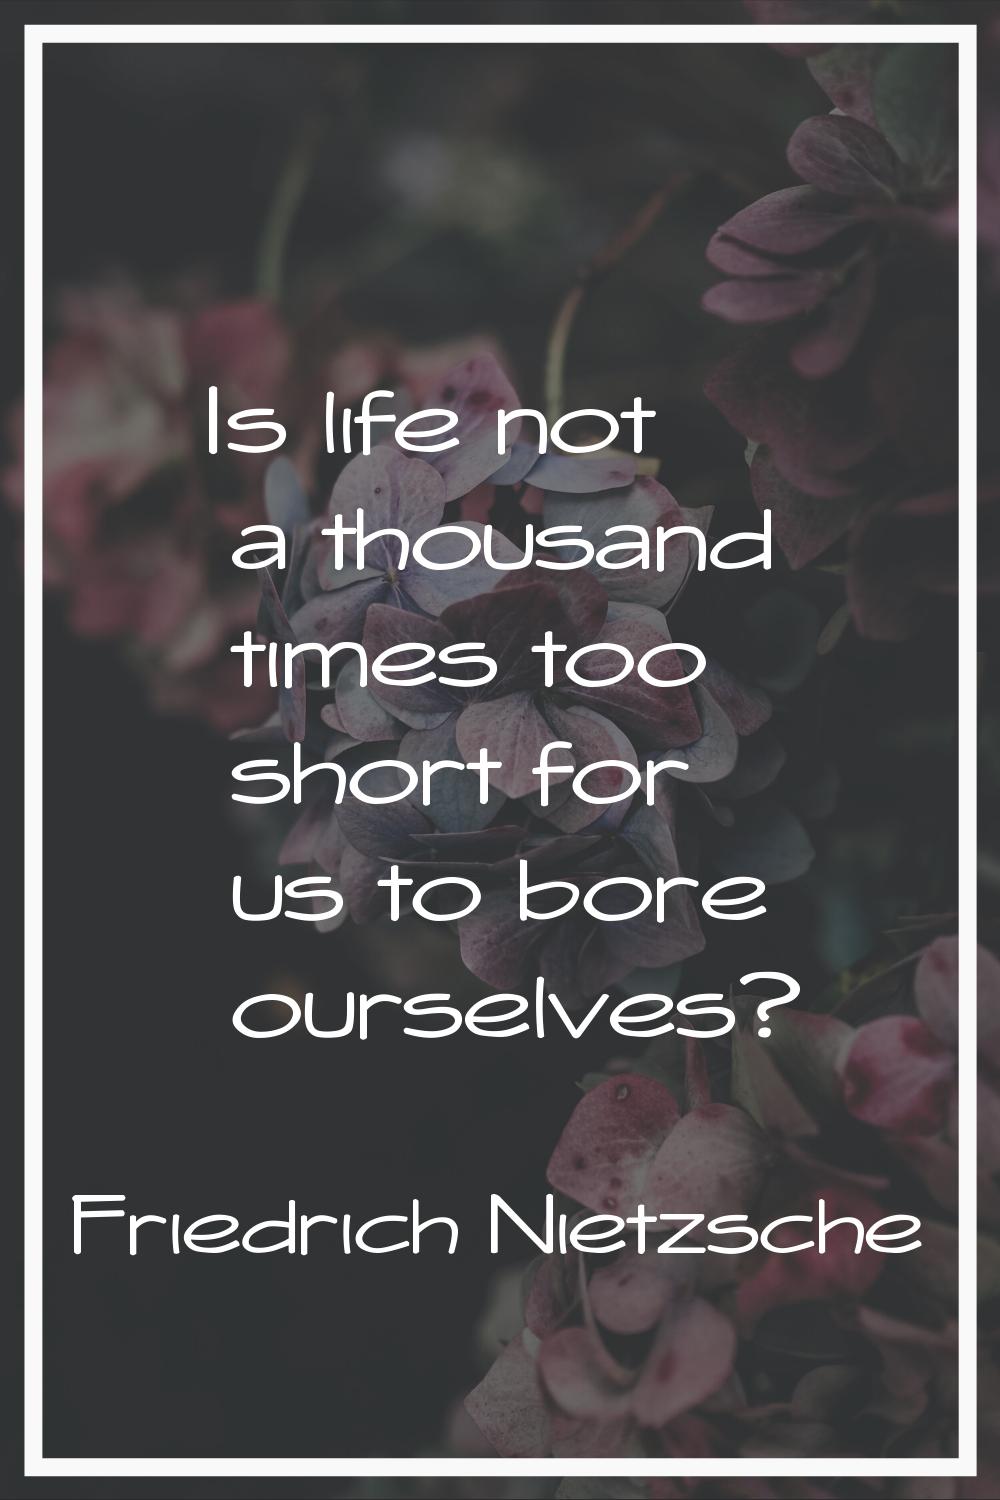 Is life not a thousand times too short for us to bore ourselves?